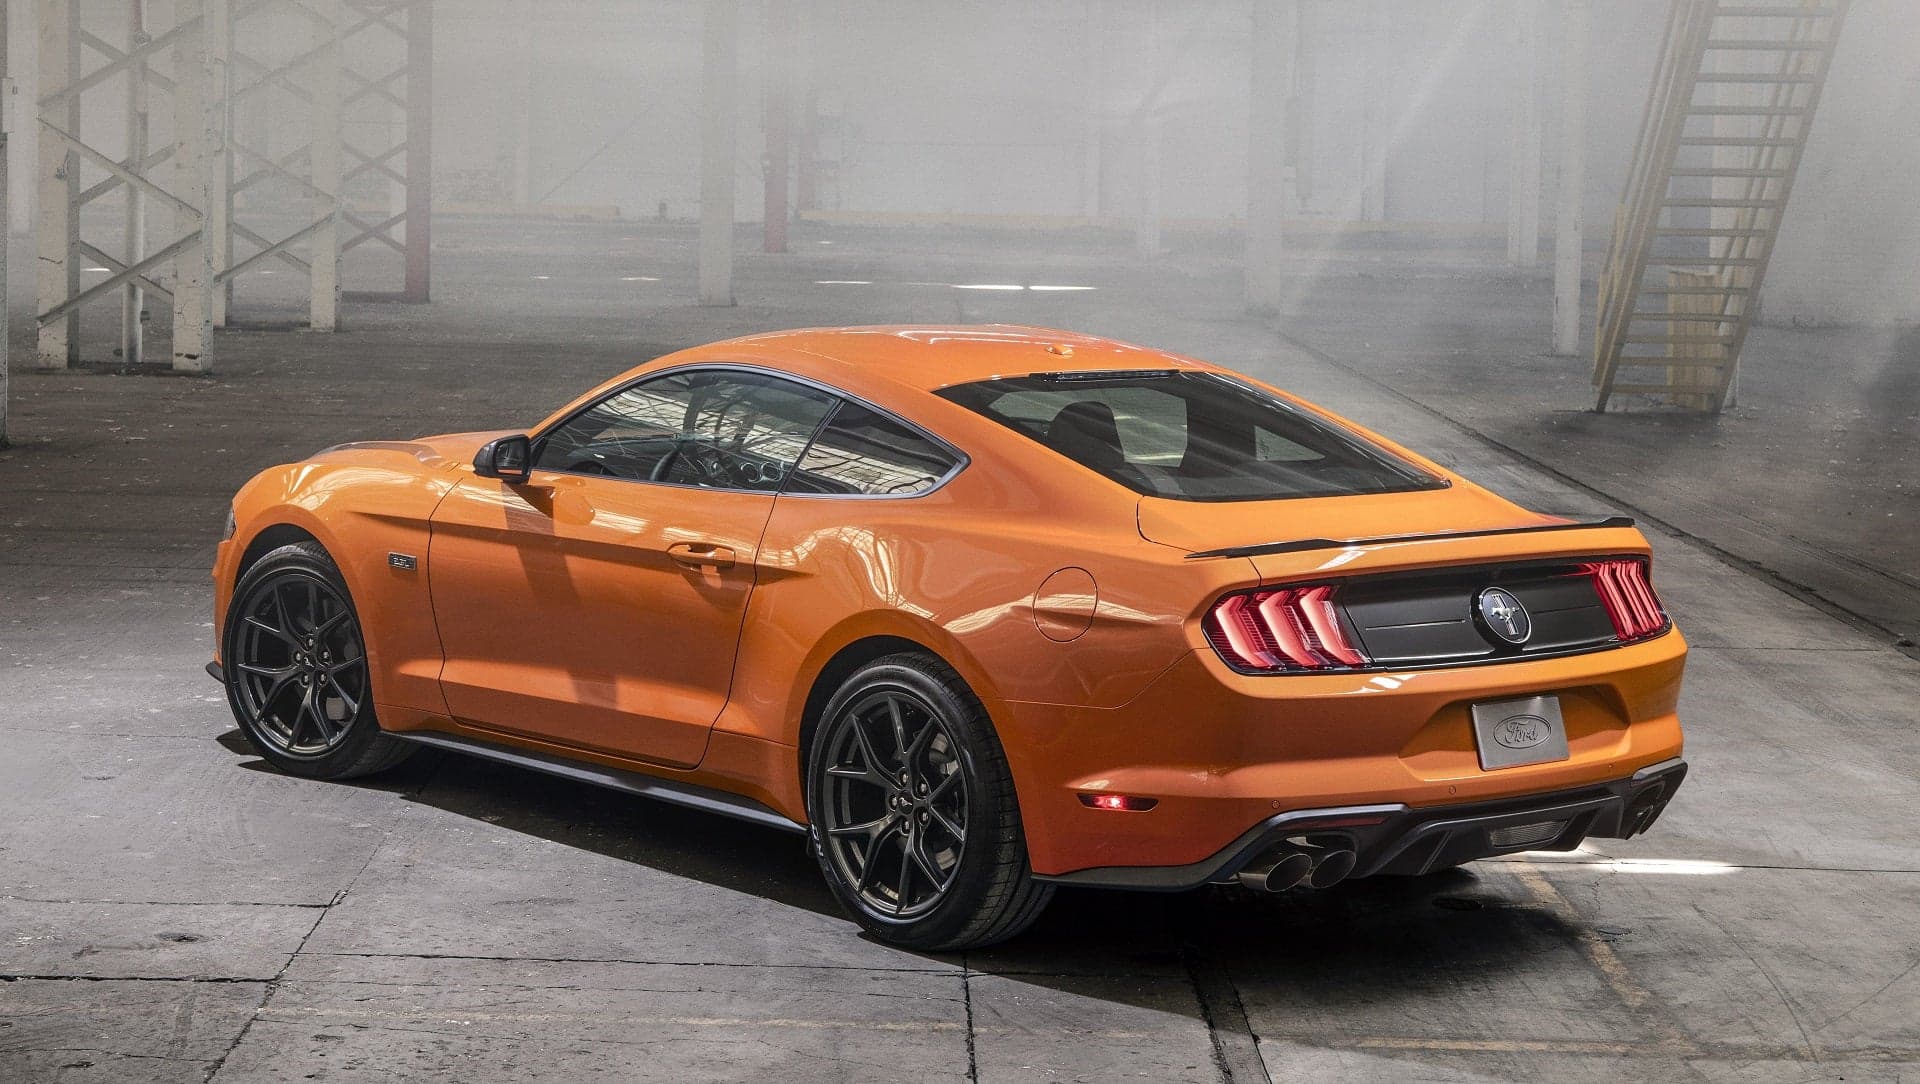 The Next Ford Mustang Will Launch in 2022 With AWD and Hybrid Power: Report